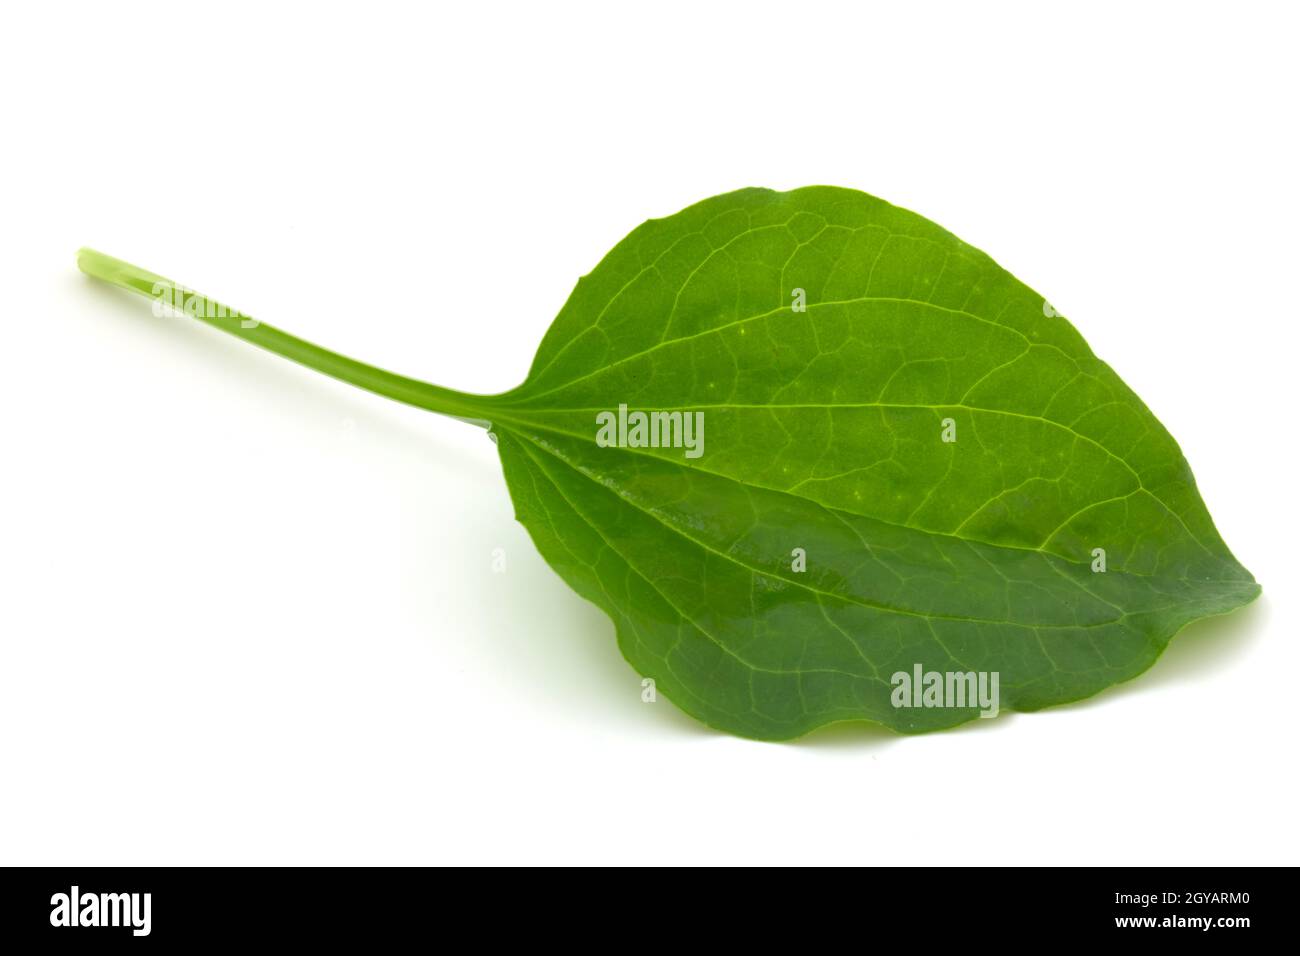 Plantain leaf, medicinal plant isolated on white background Stock Photo